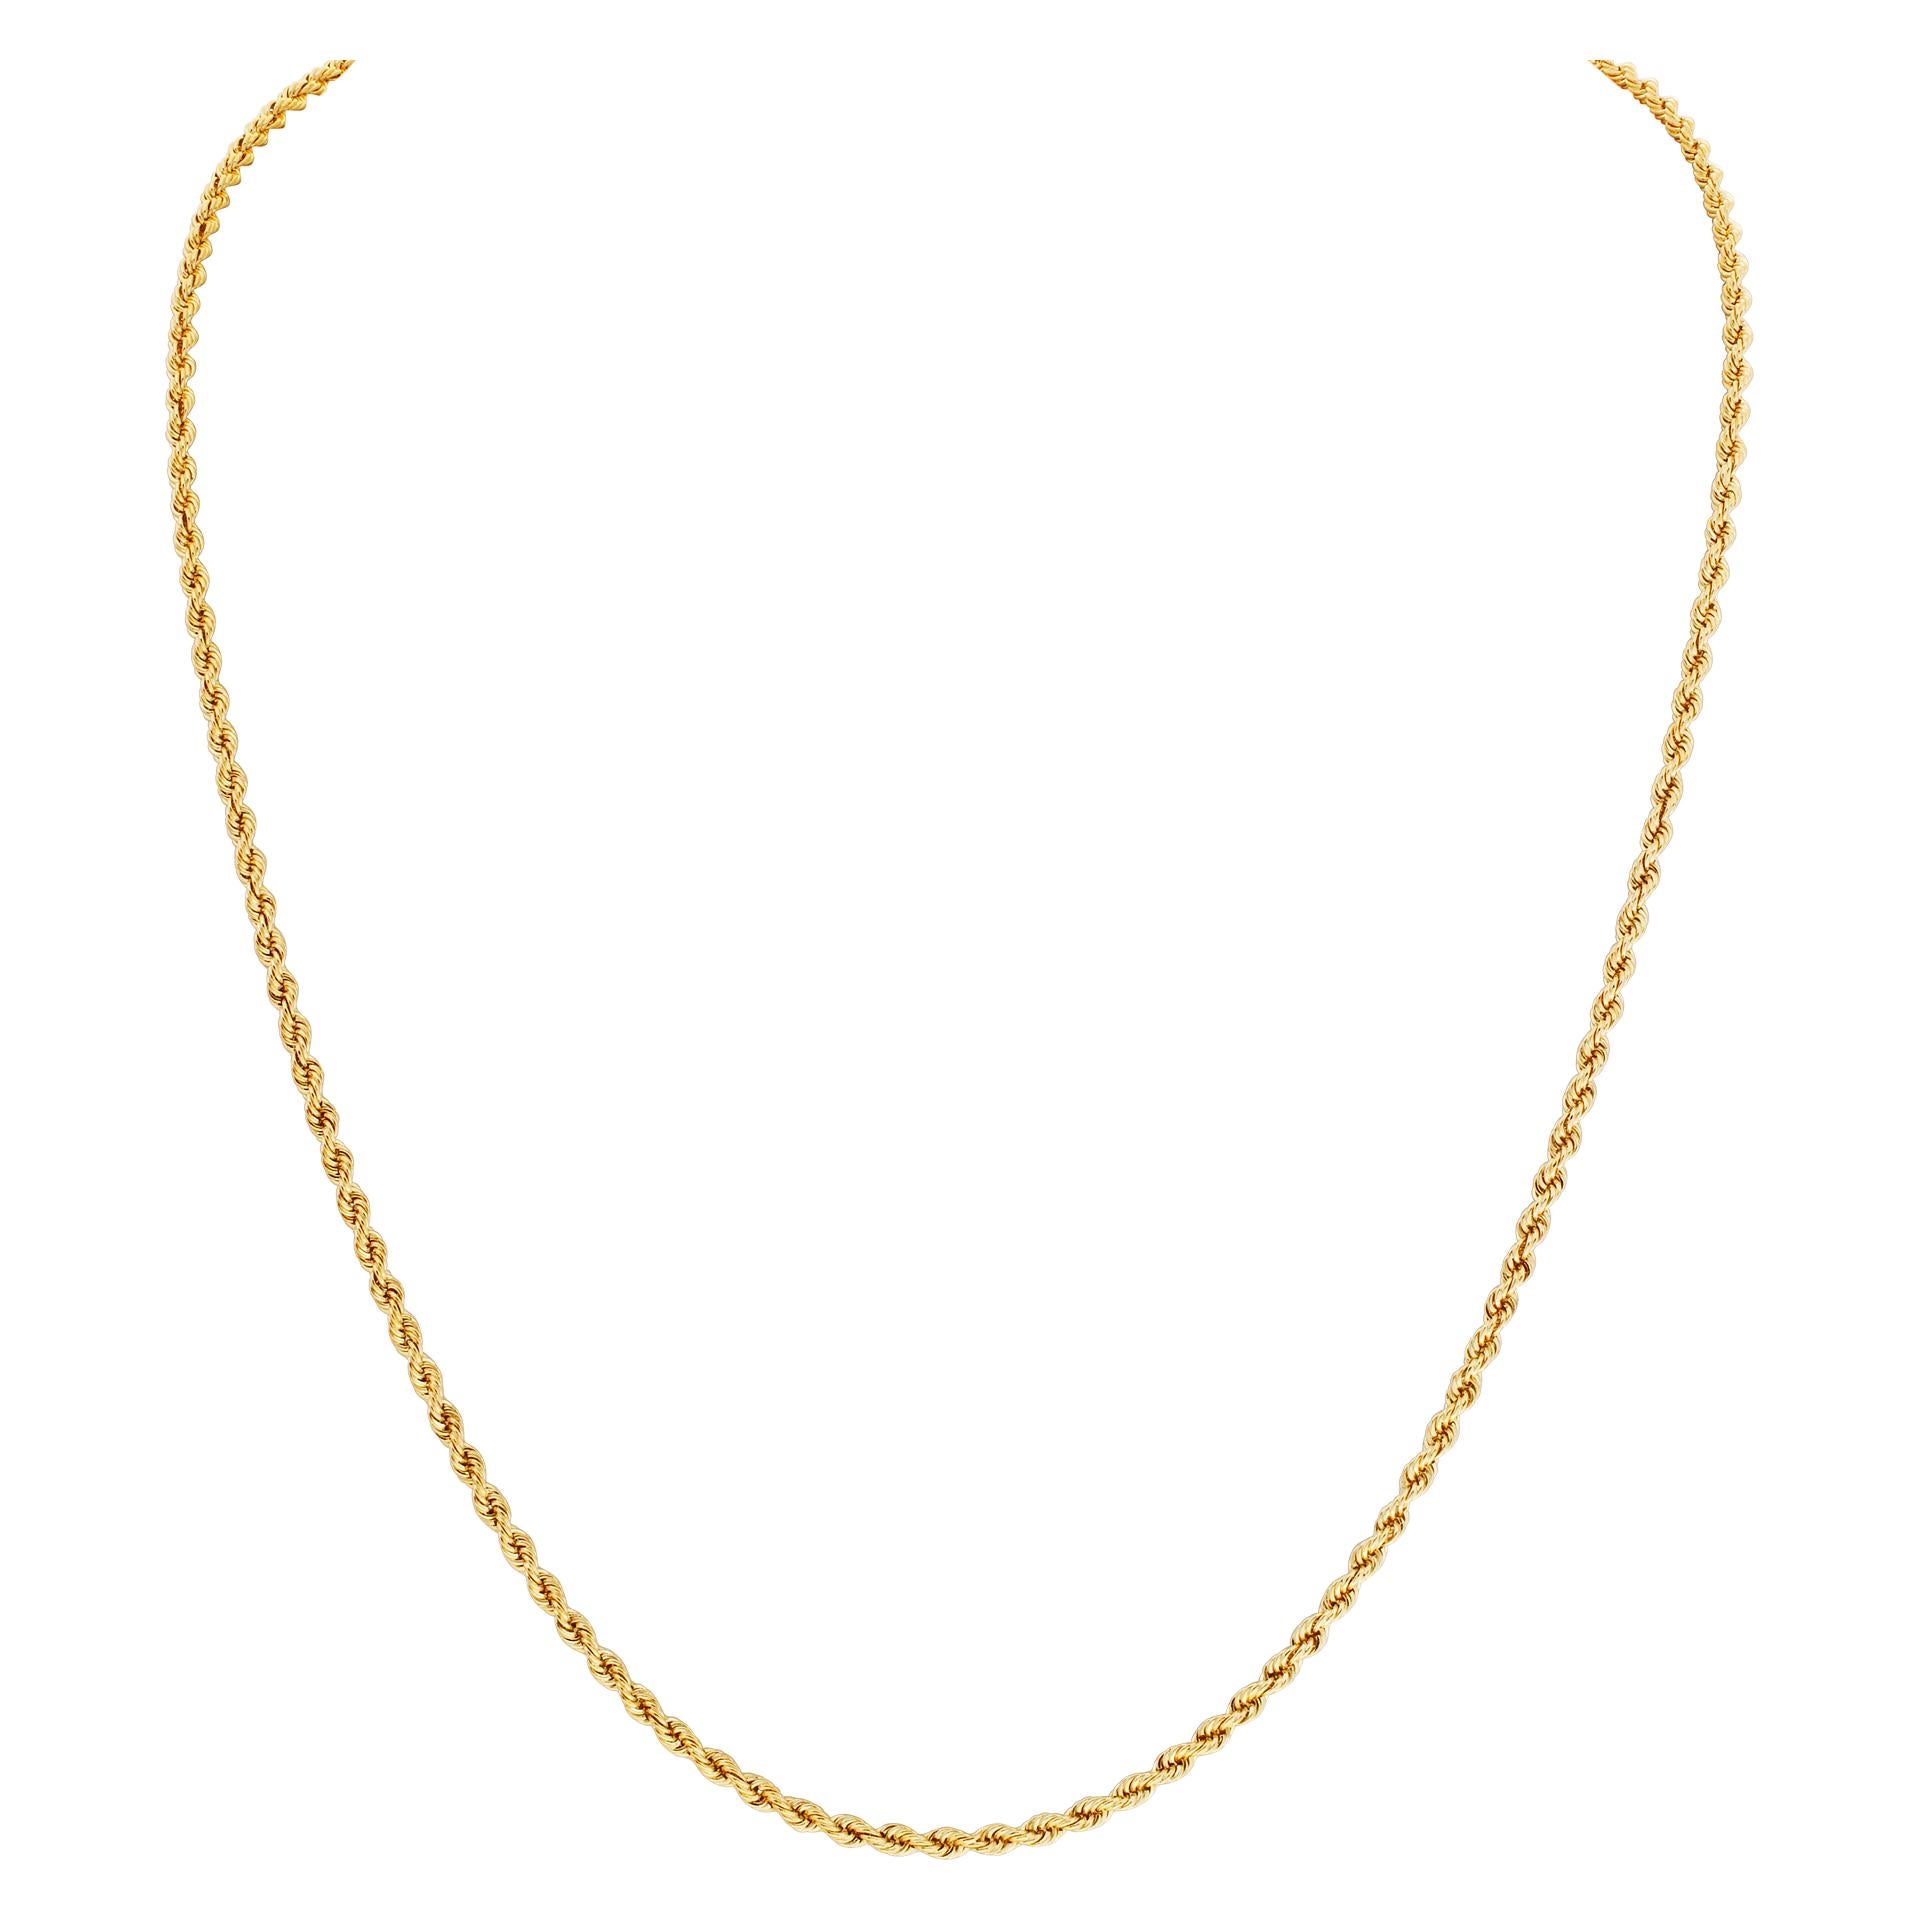 14k yellow gold twisted rope chain. Chain length is 20 inches. Width 2.2 mm
